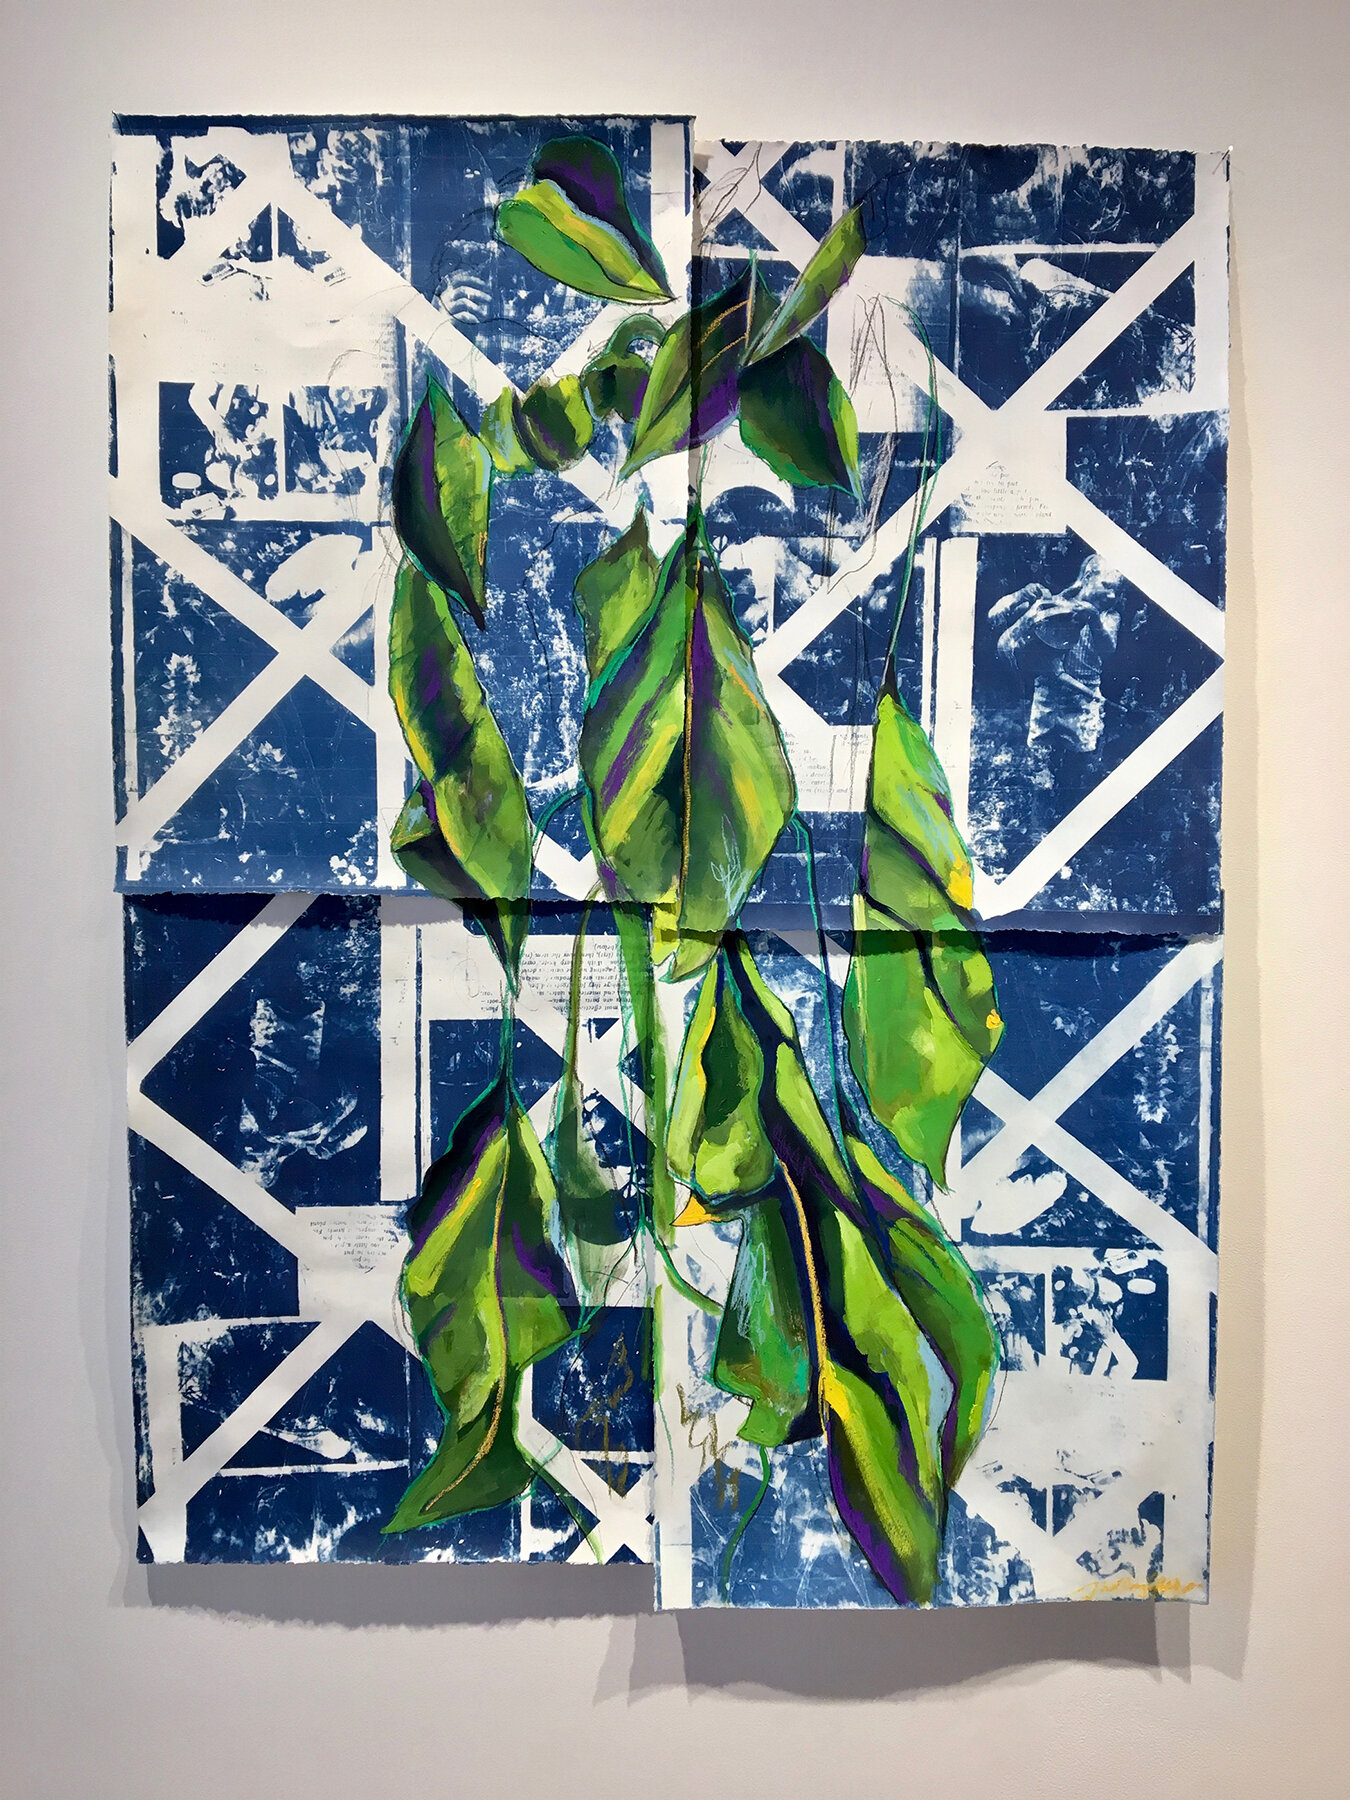   my yard ; cyanotype, oil paint, pastel, charcoal; 42 x 32 inches 